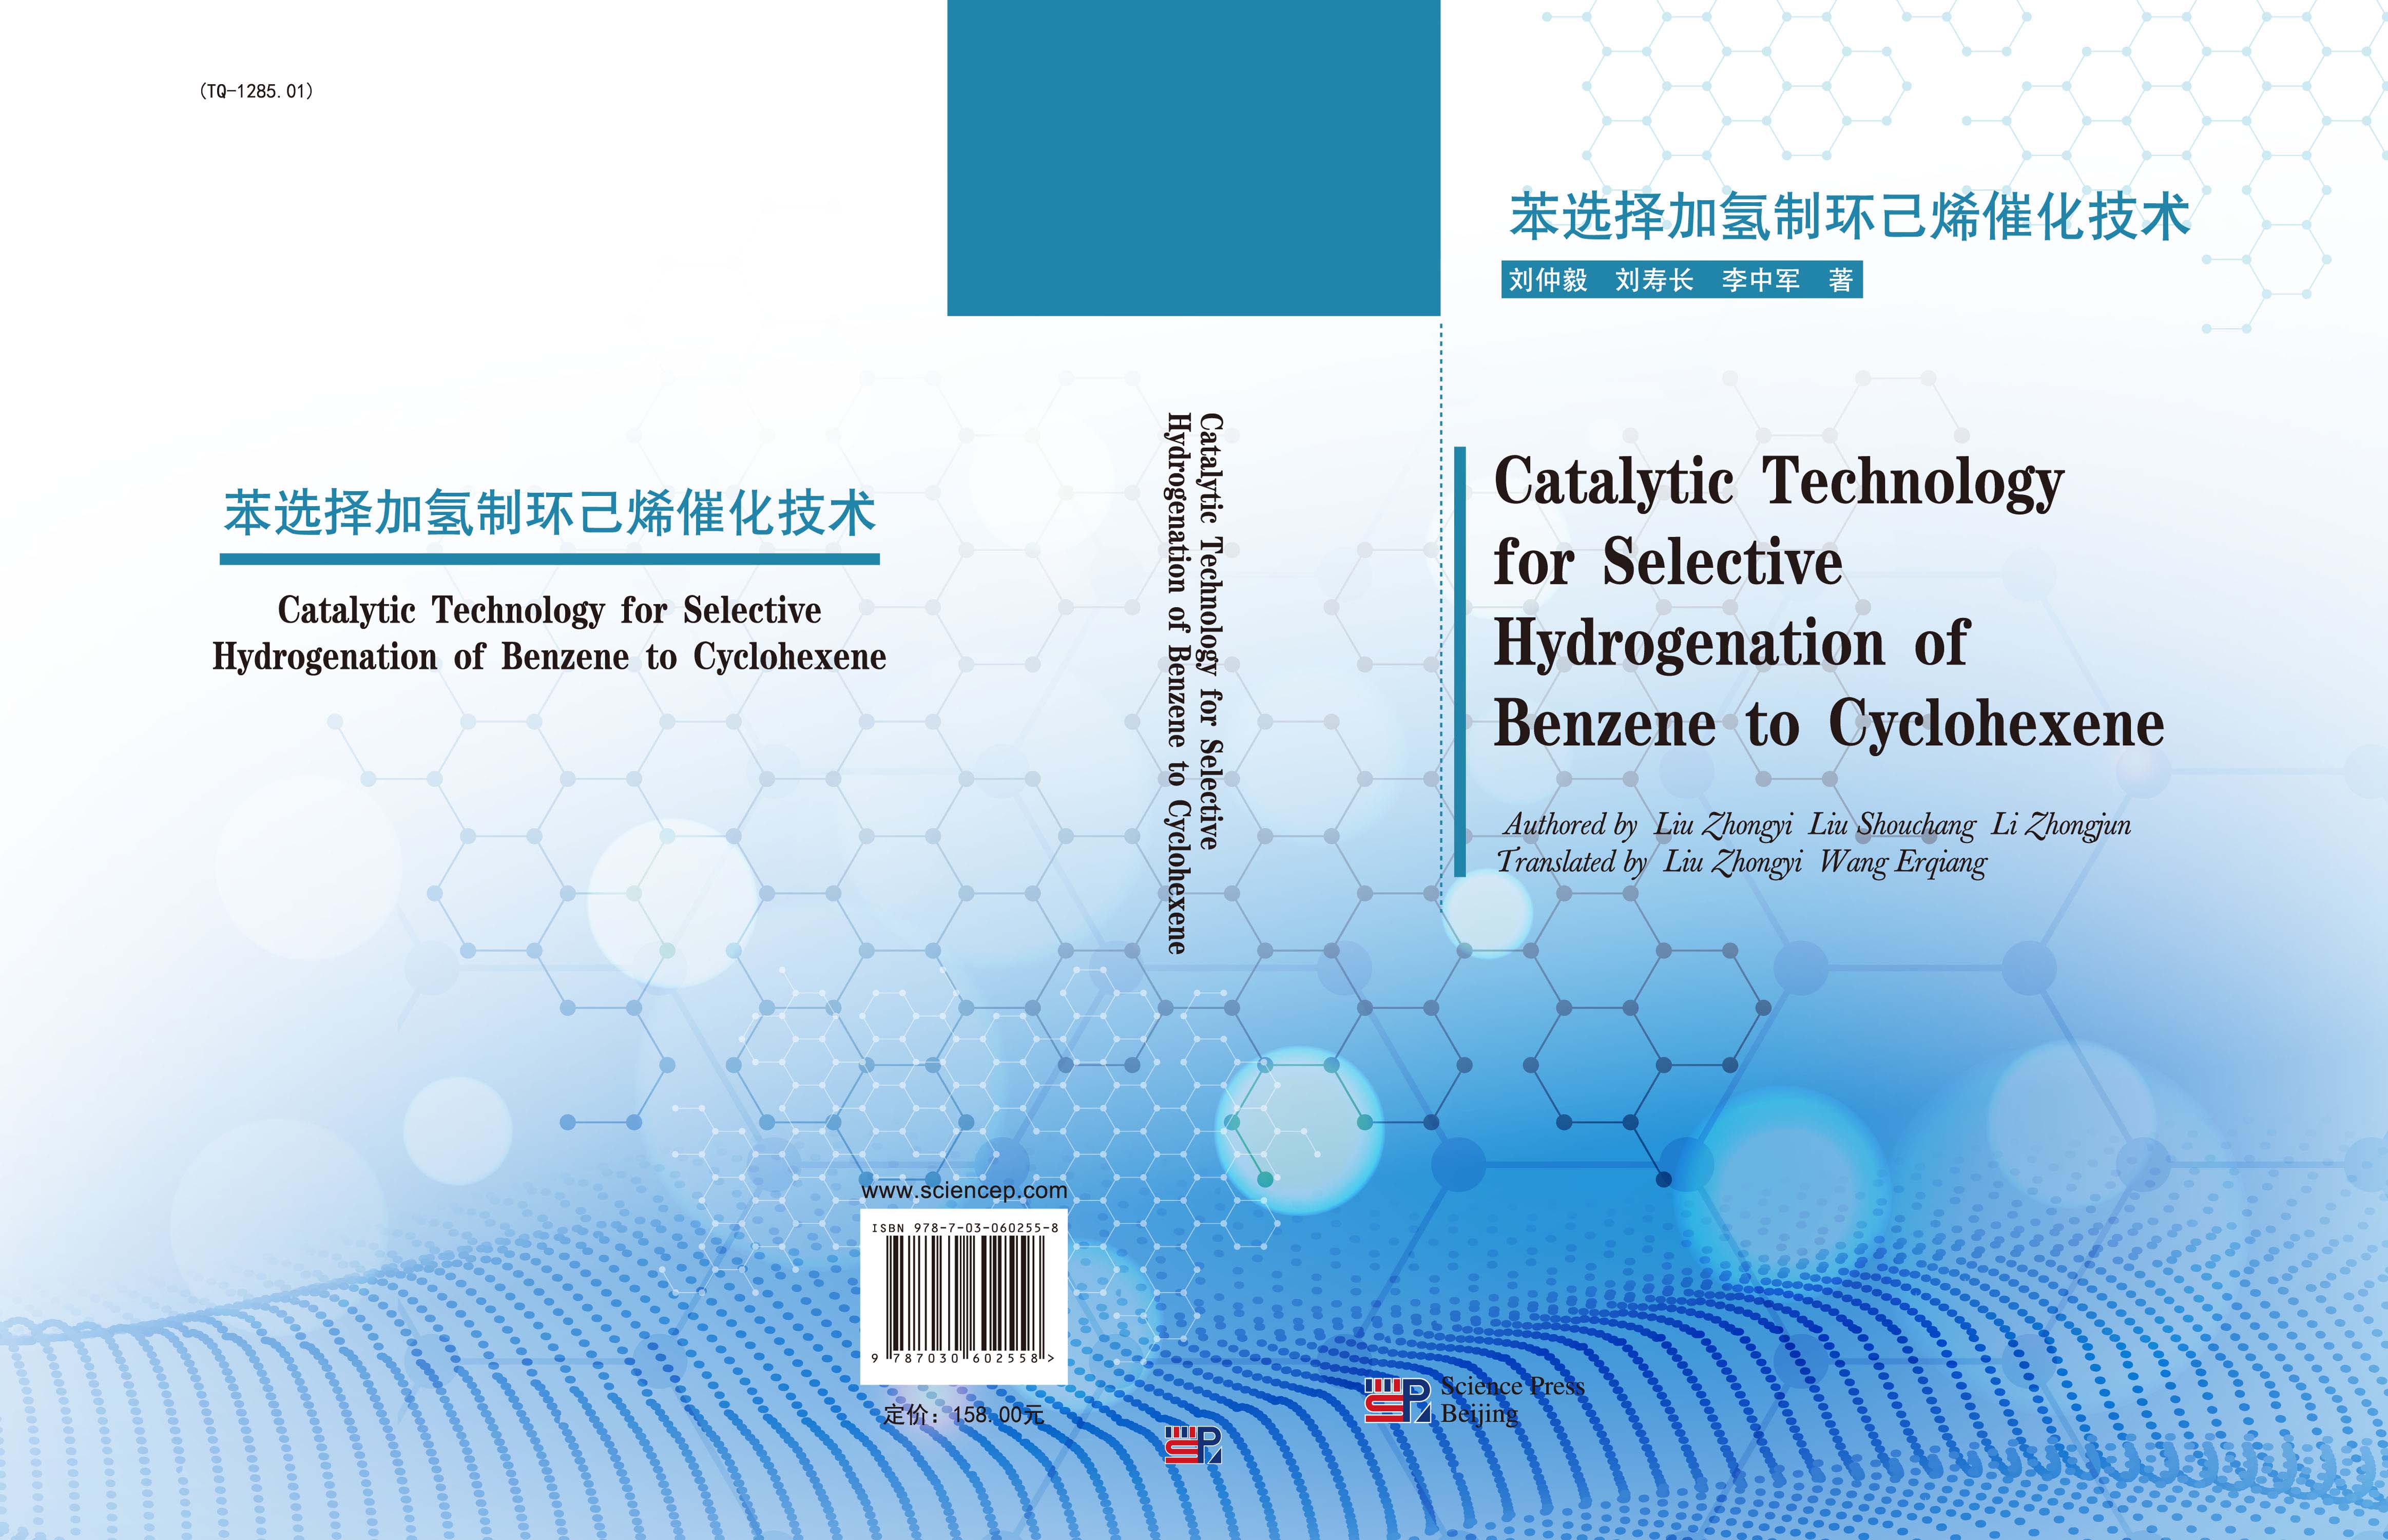 Catalytic Technology for Selective Hydrogenation of Benzene to Cyclohexene（苯选择加氢制环己烯催化技术）